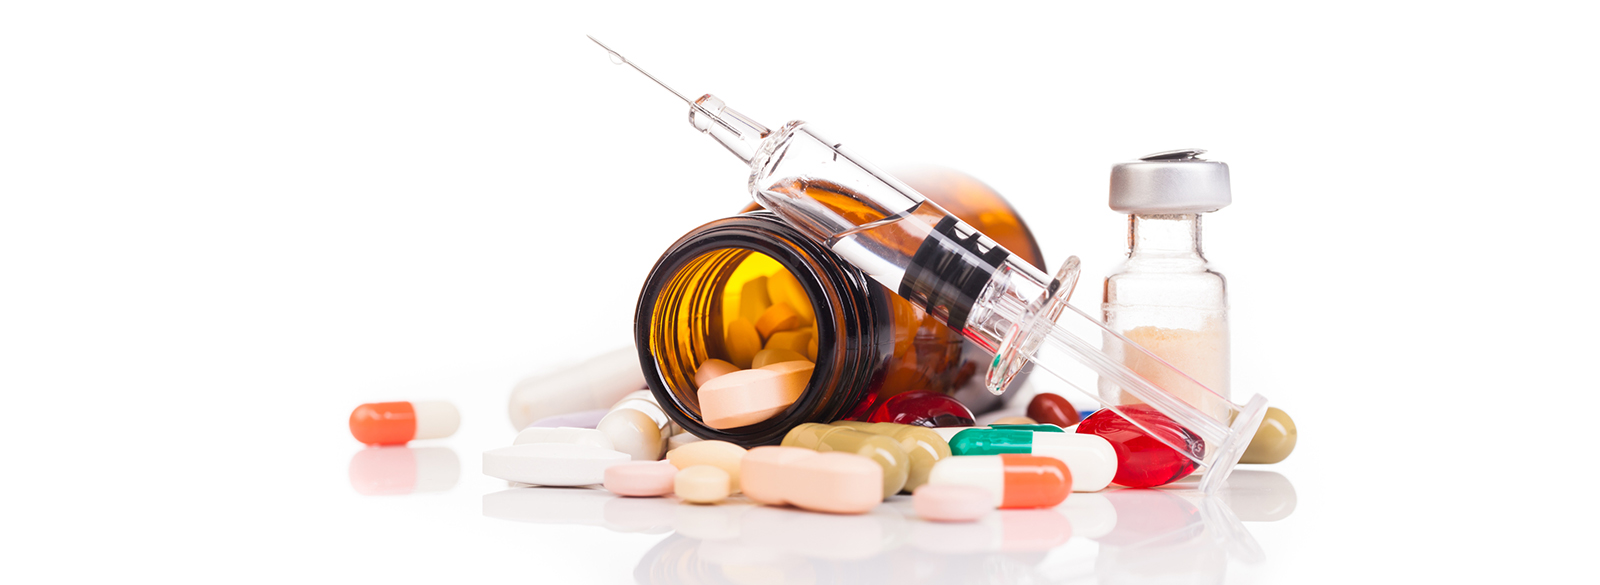 Access to compounded medications